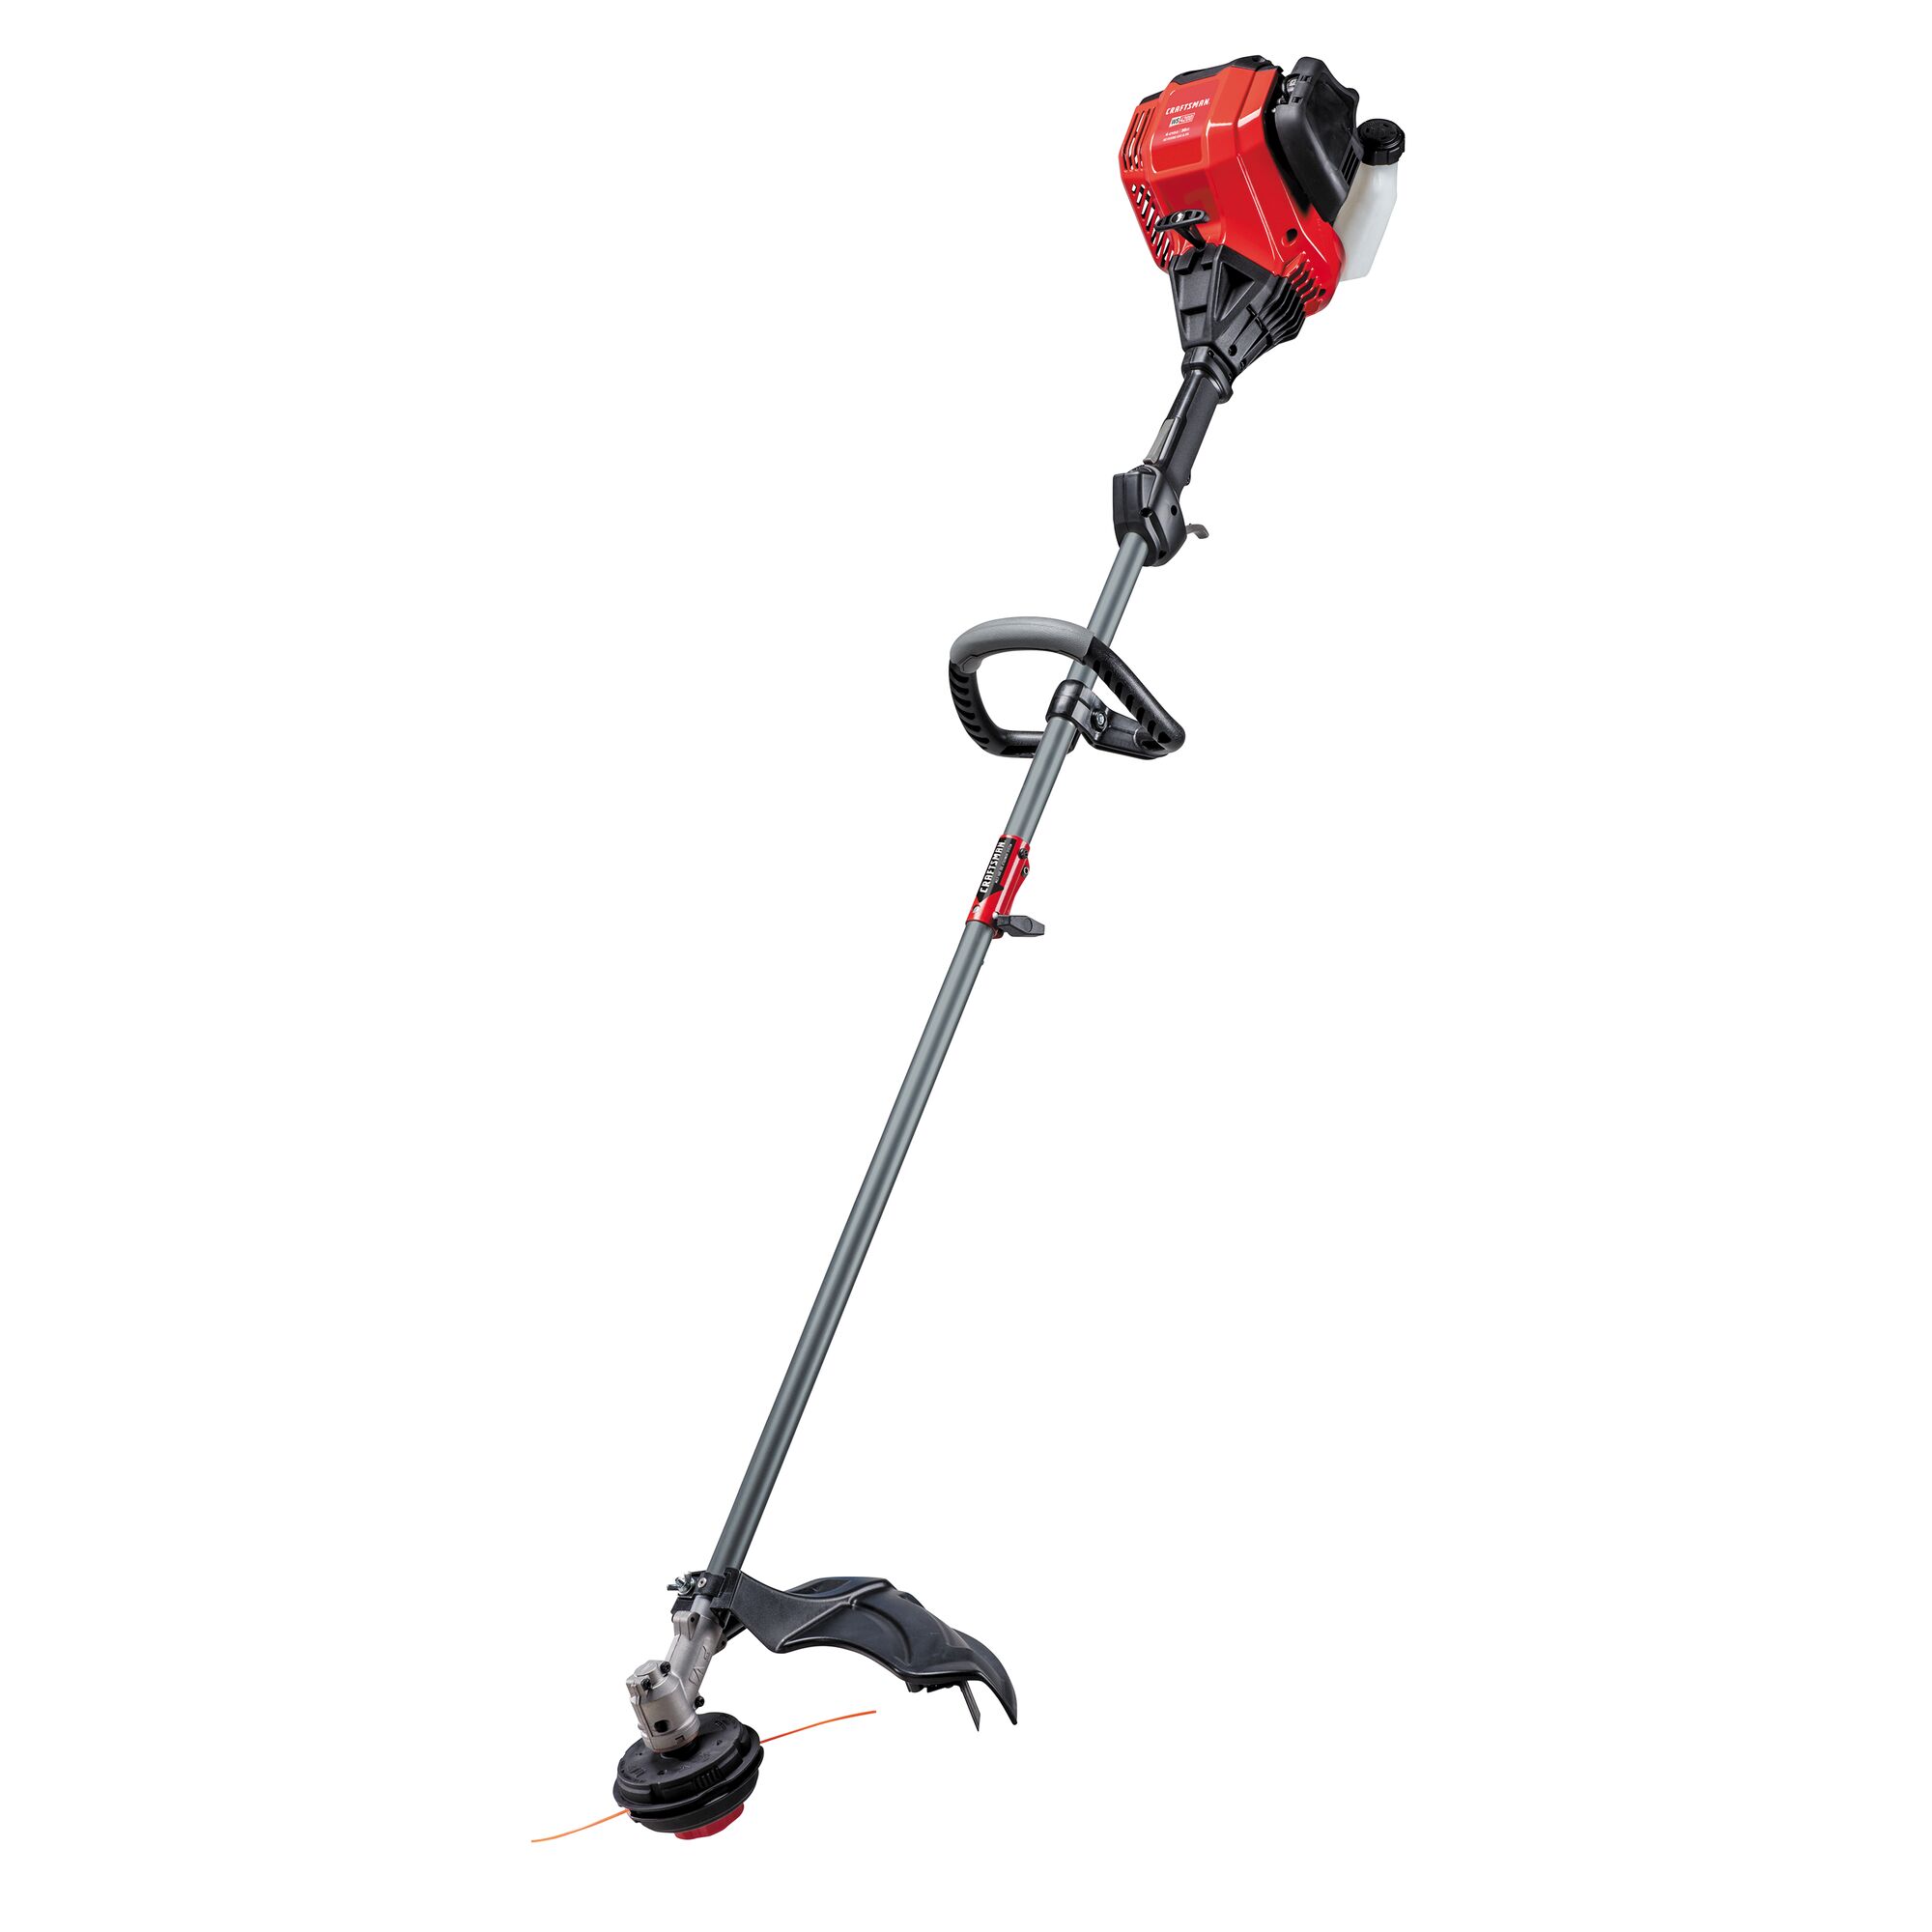 Weedwacker 30 C C 4 cycle 17 inch attachment capable straight shaft gas trimmer.